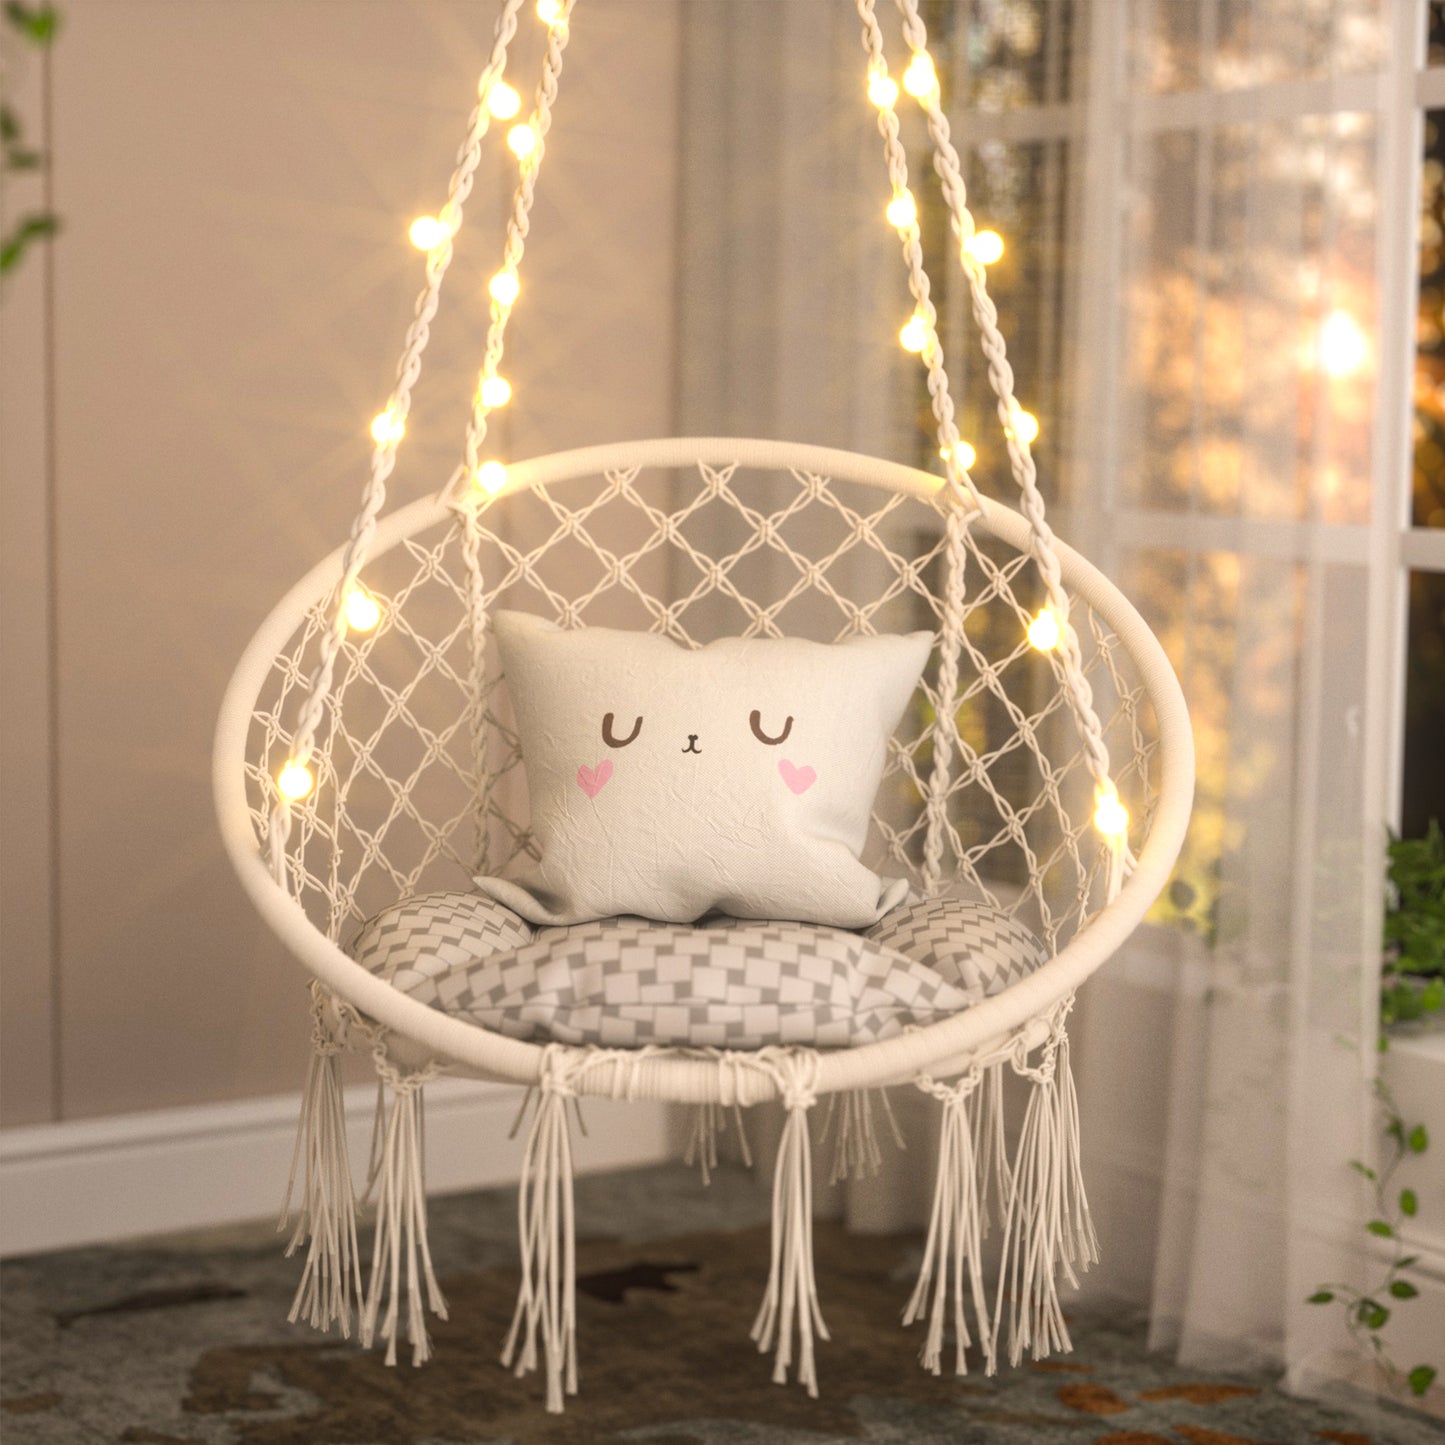 XJD Swing Chair Macrame Hanging Hammock Chair with Lights – Stylish Decorative Premium Cotton Ceiling Boho Chair for Durability- Indoor, Outdoor, Chair, Patio, Porch, Garden, Gifts - Max 330Lbs